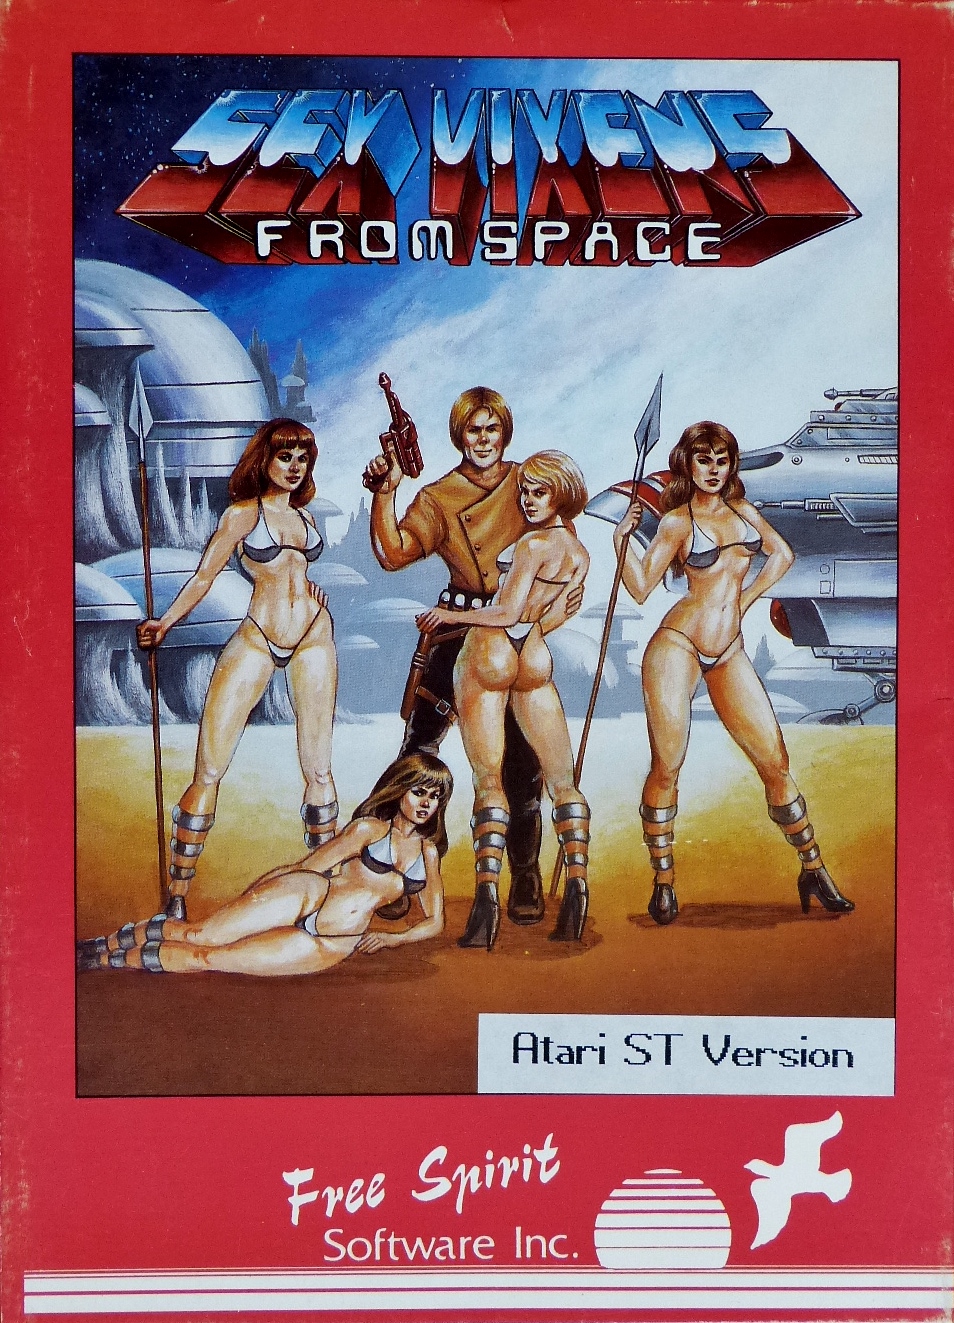 Computer Game Museum Display Case - Sex Vixens from Space